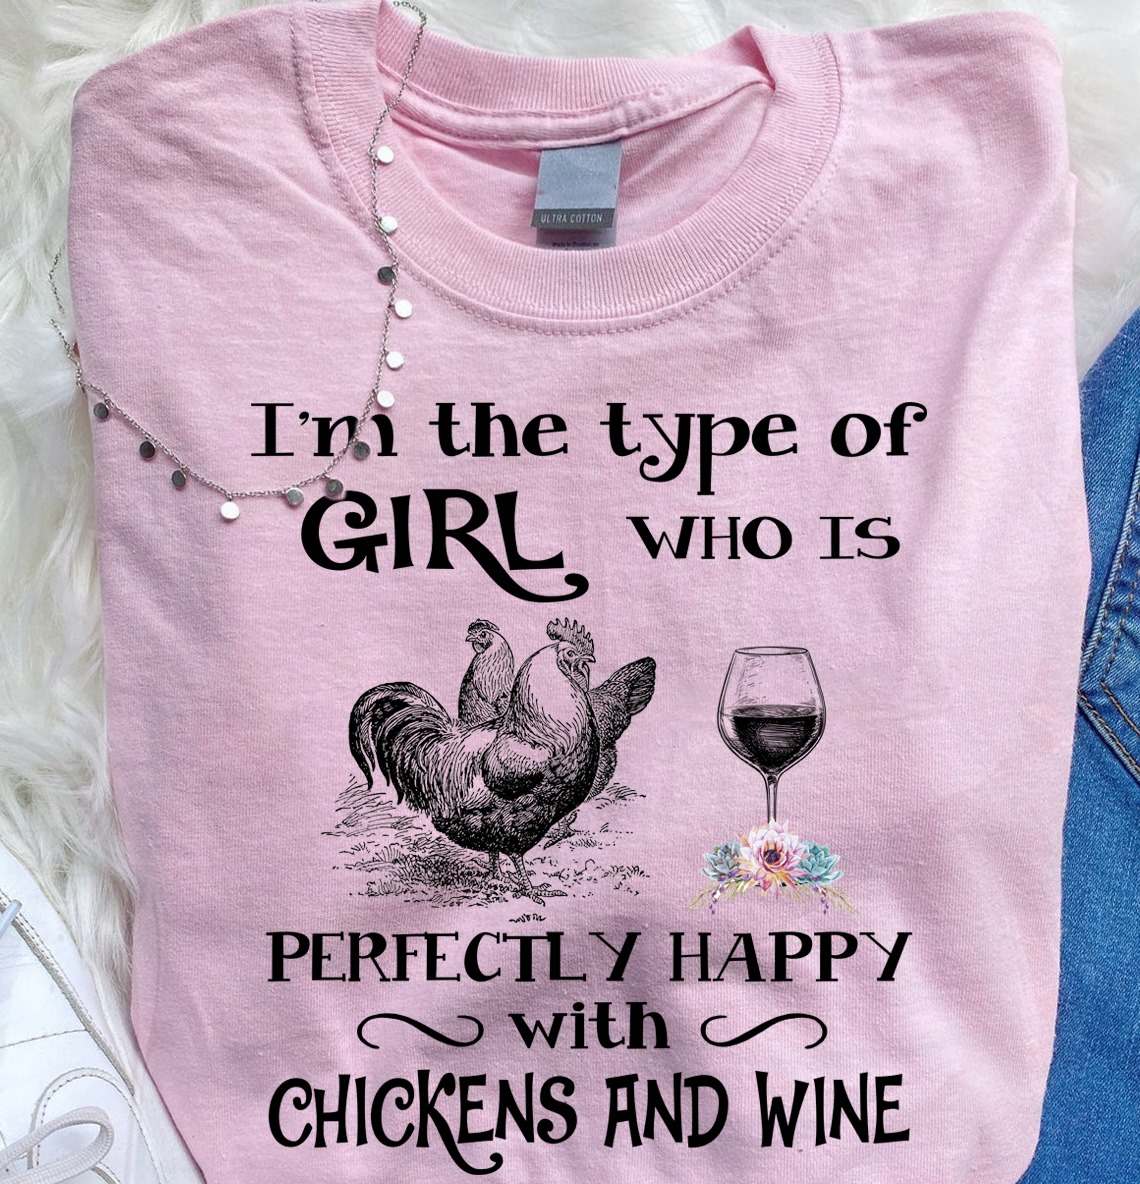 I'm the type of girl who is perfectly happy with chickens and wine